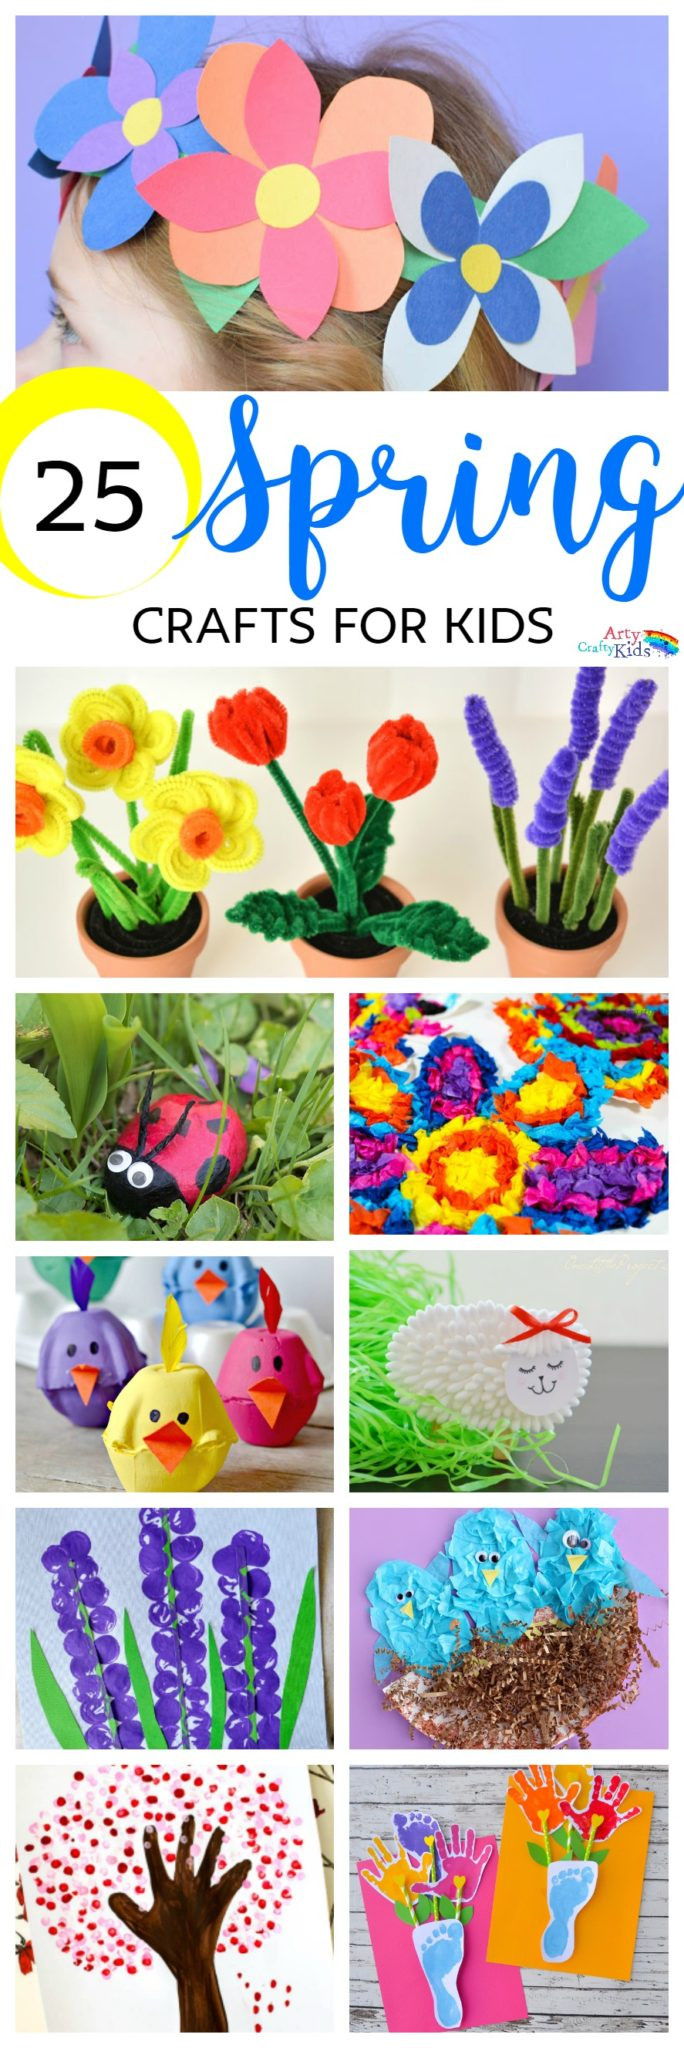 Spring Ideas For Children
 Easy Spring Crafts for Kids Arty Crafty Kids